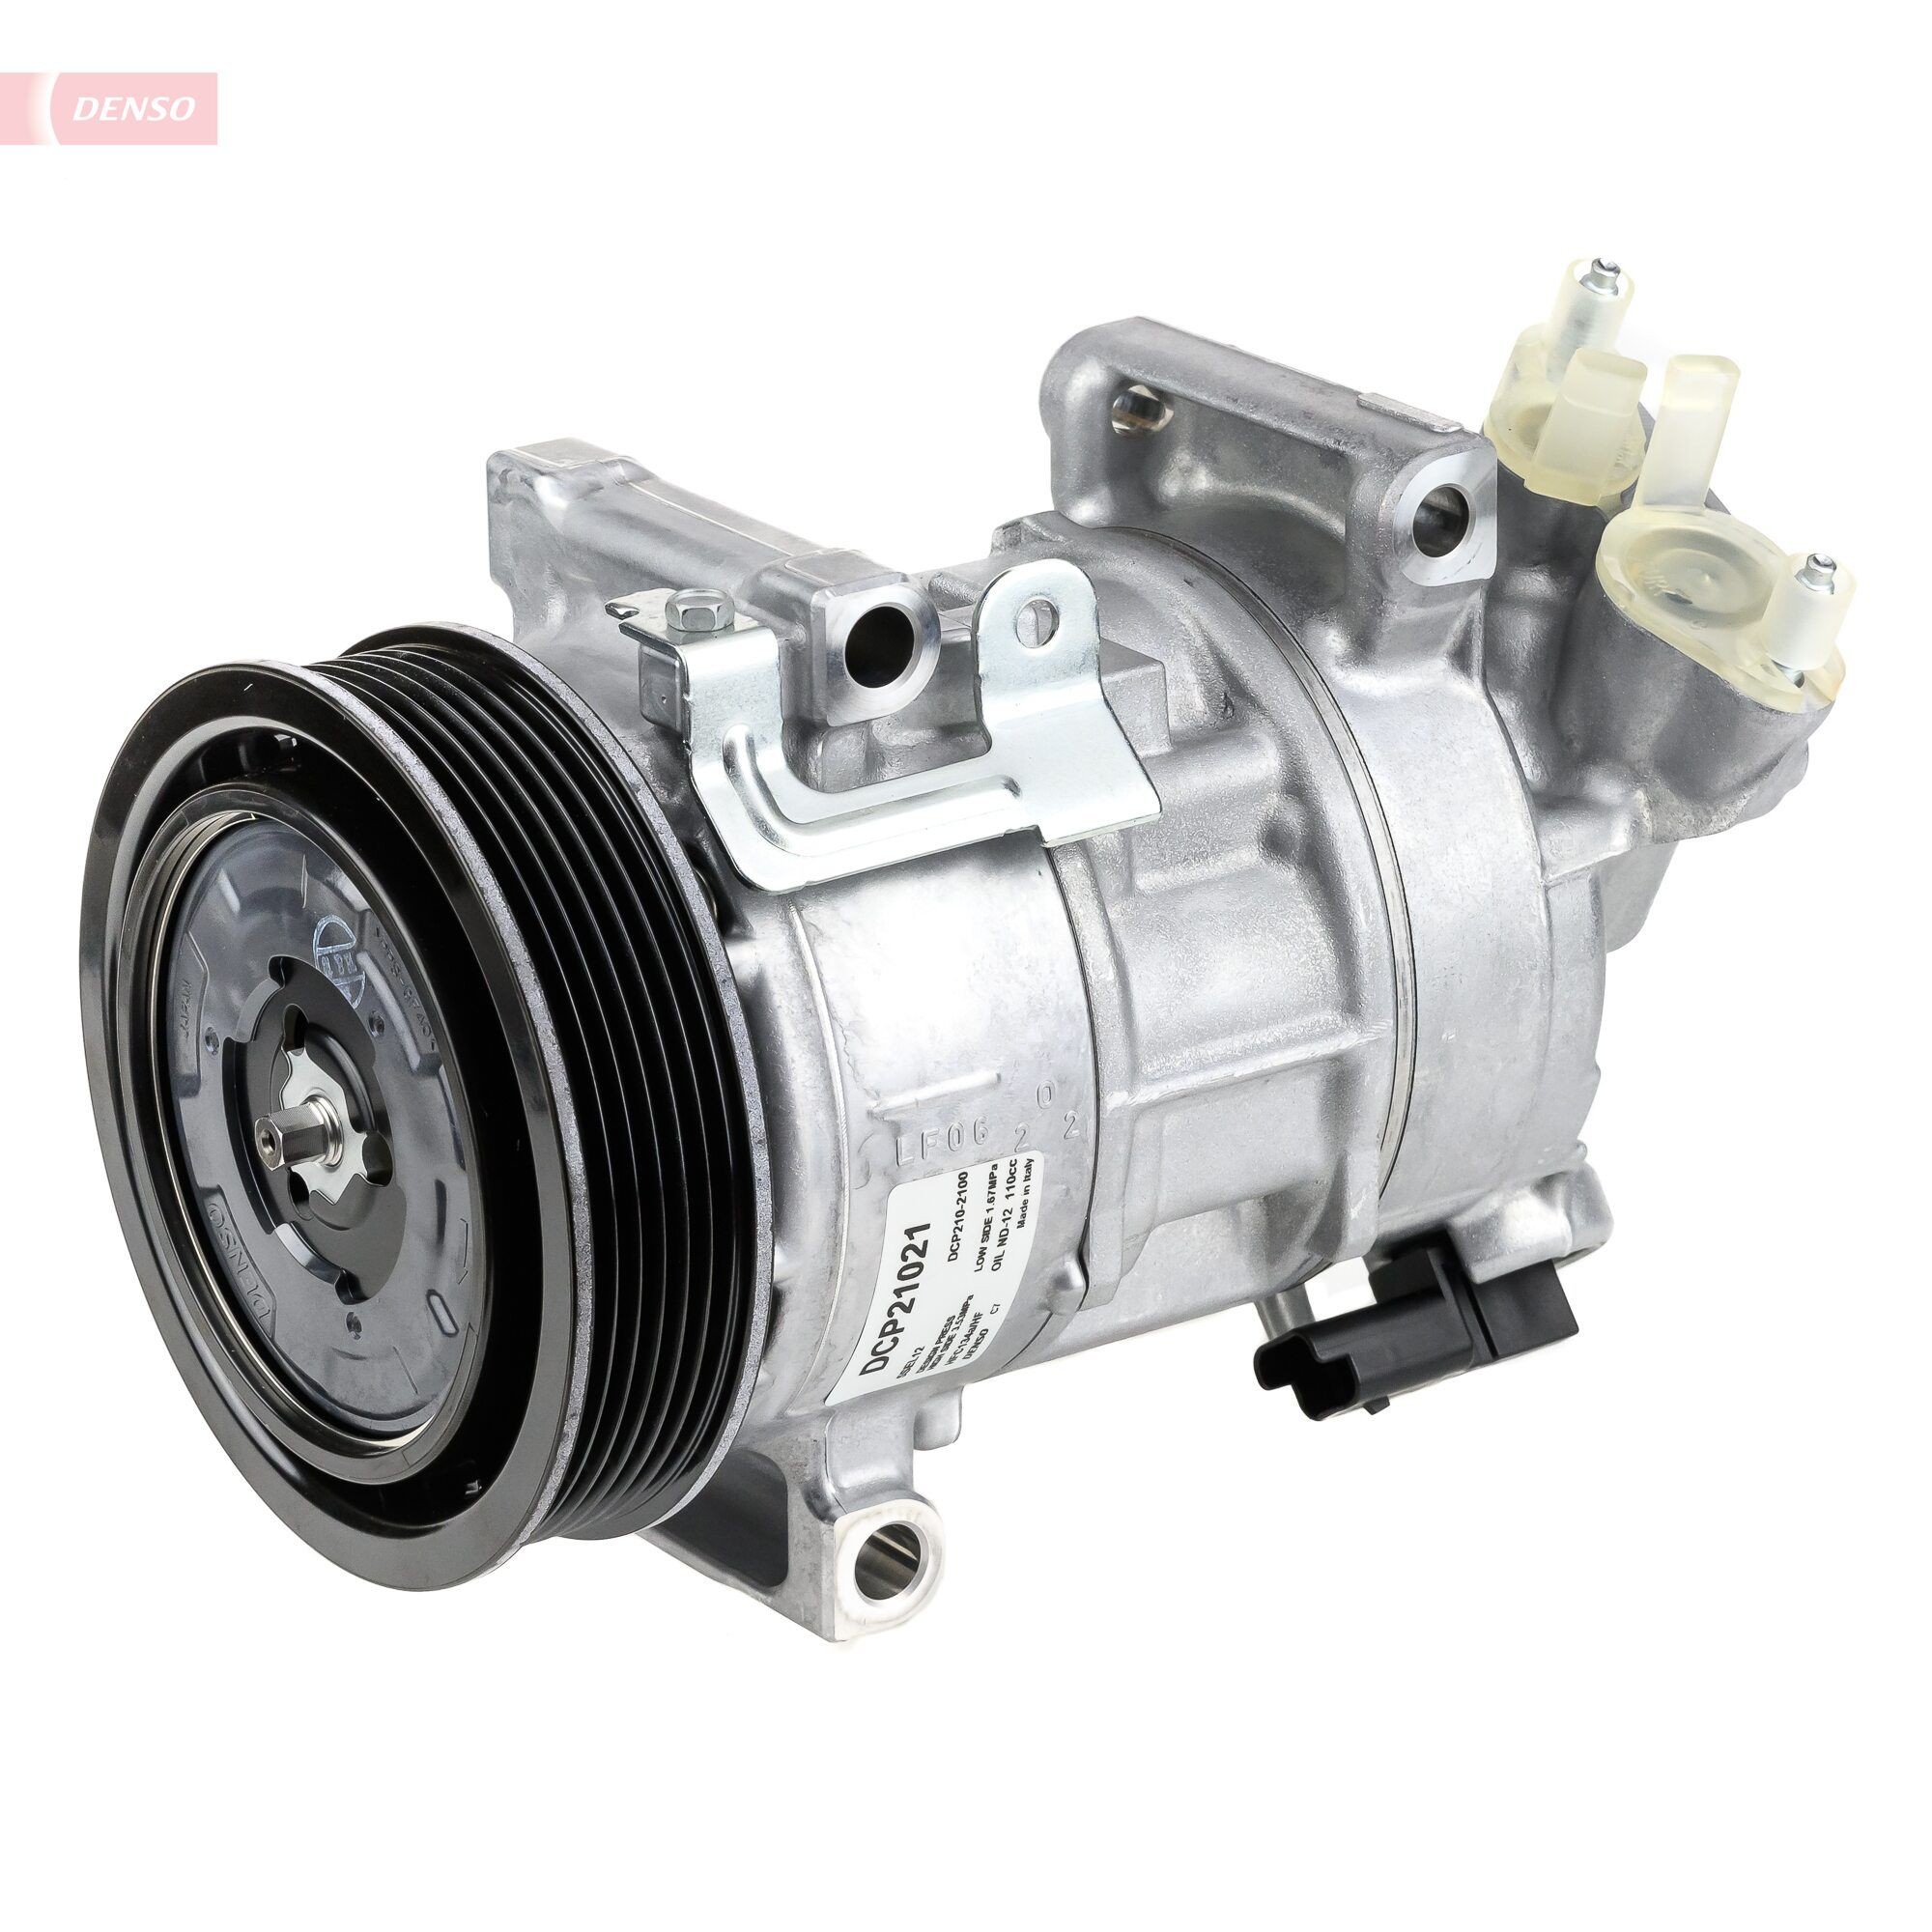 Peugeot Air conditioning compressor DENSO DCP21021 at a good price